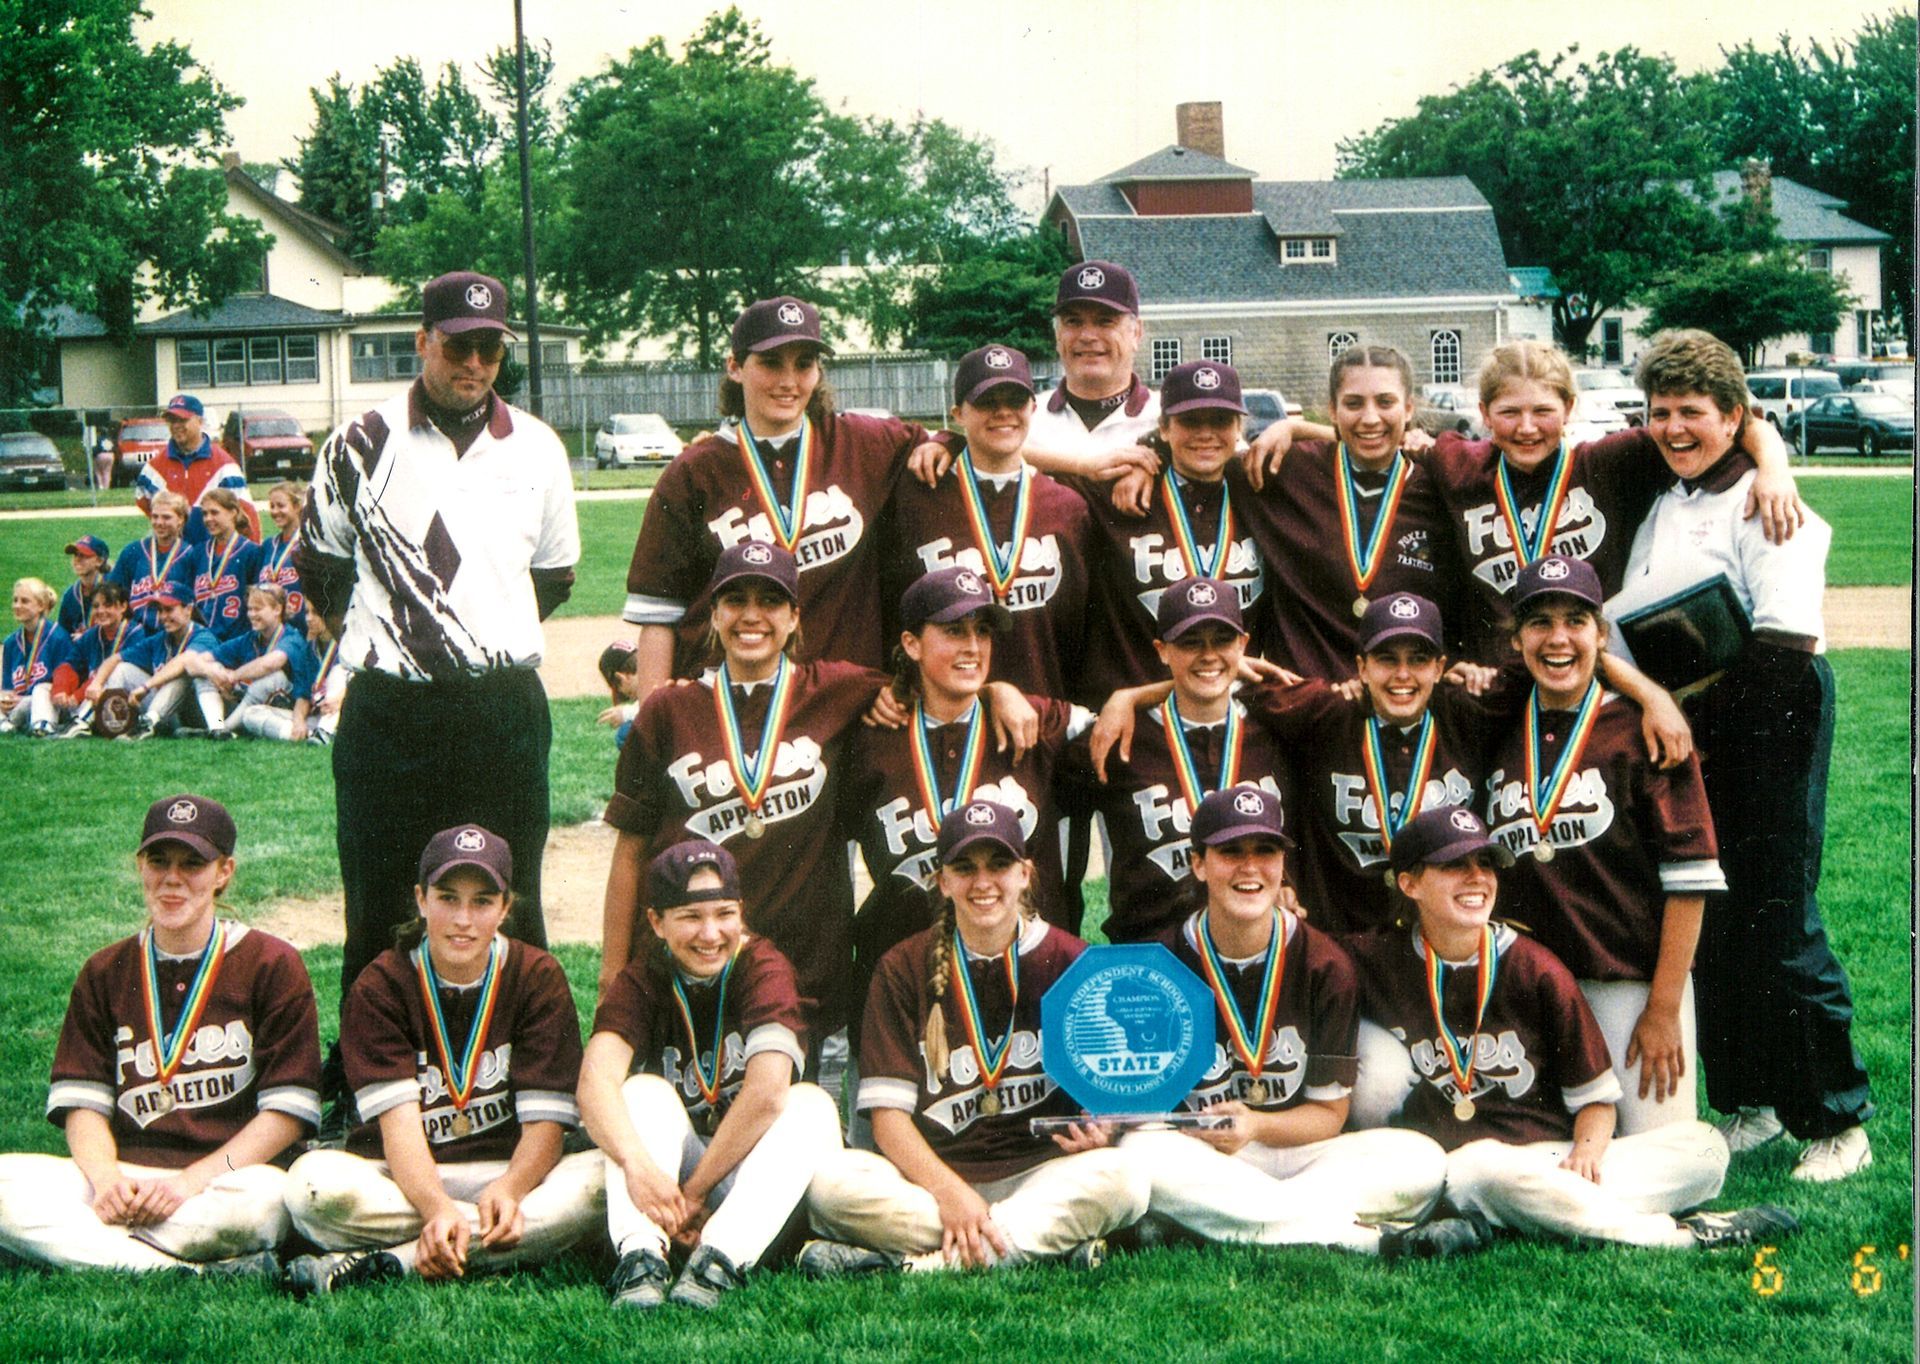 1998 Softball State Championship team, wearing their medals and holding their trophy